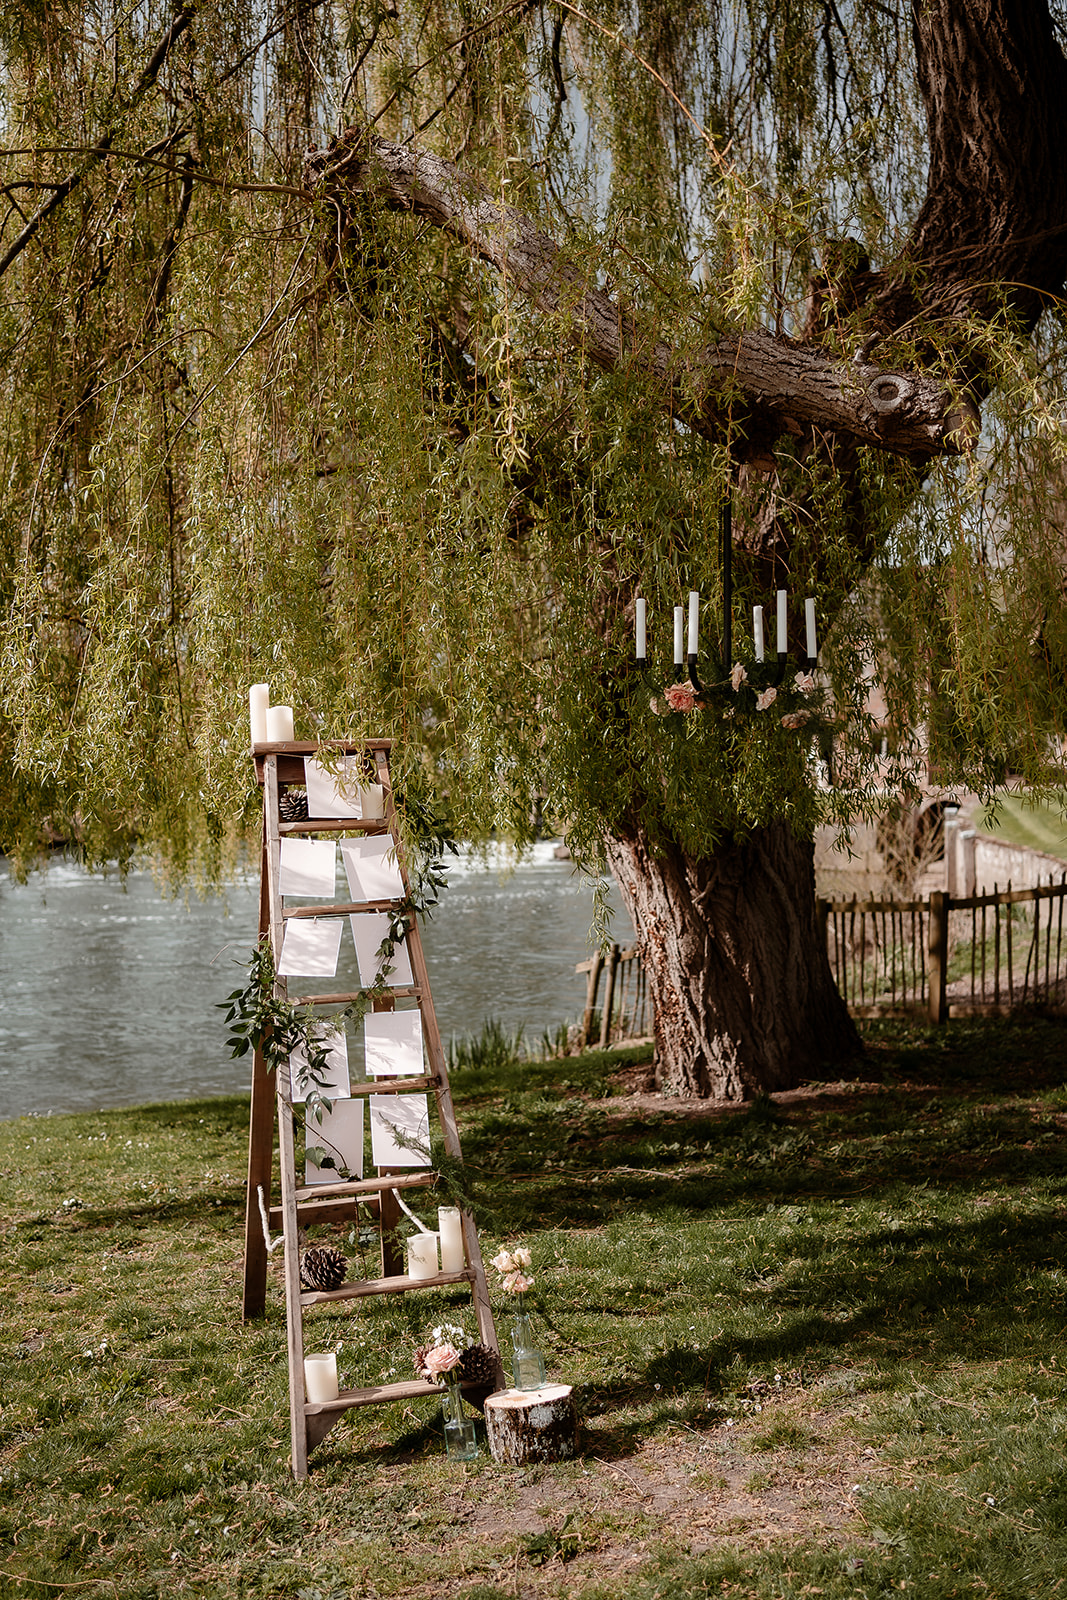 Rustic ladder seating plan by the willow tree at Mapledurham House with a flower chandelier hanging from the branches